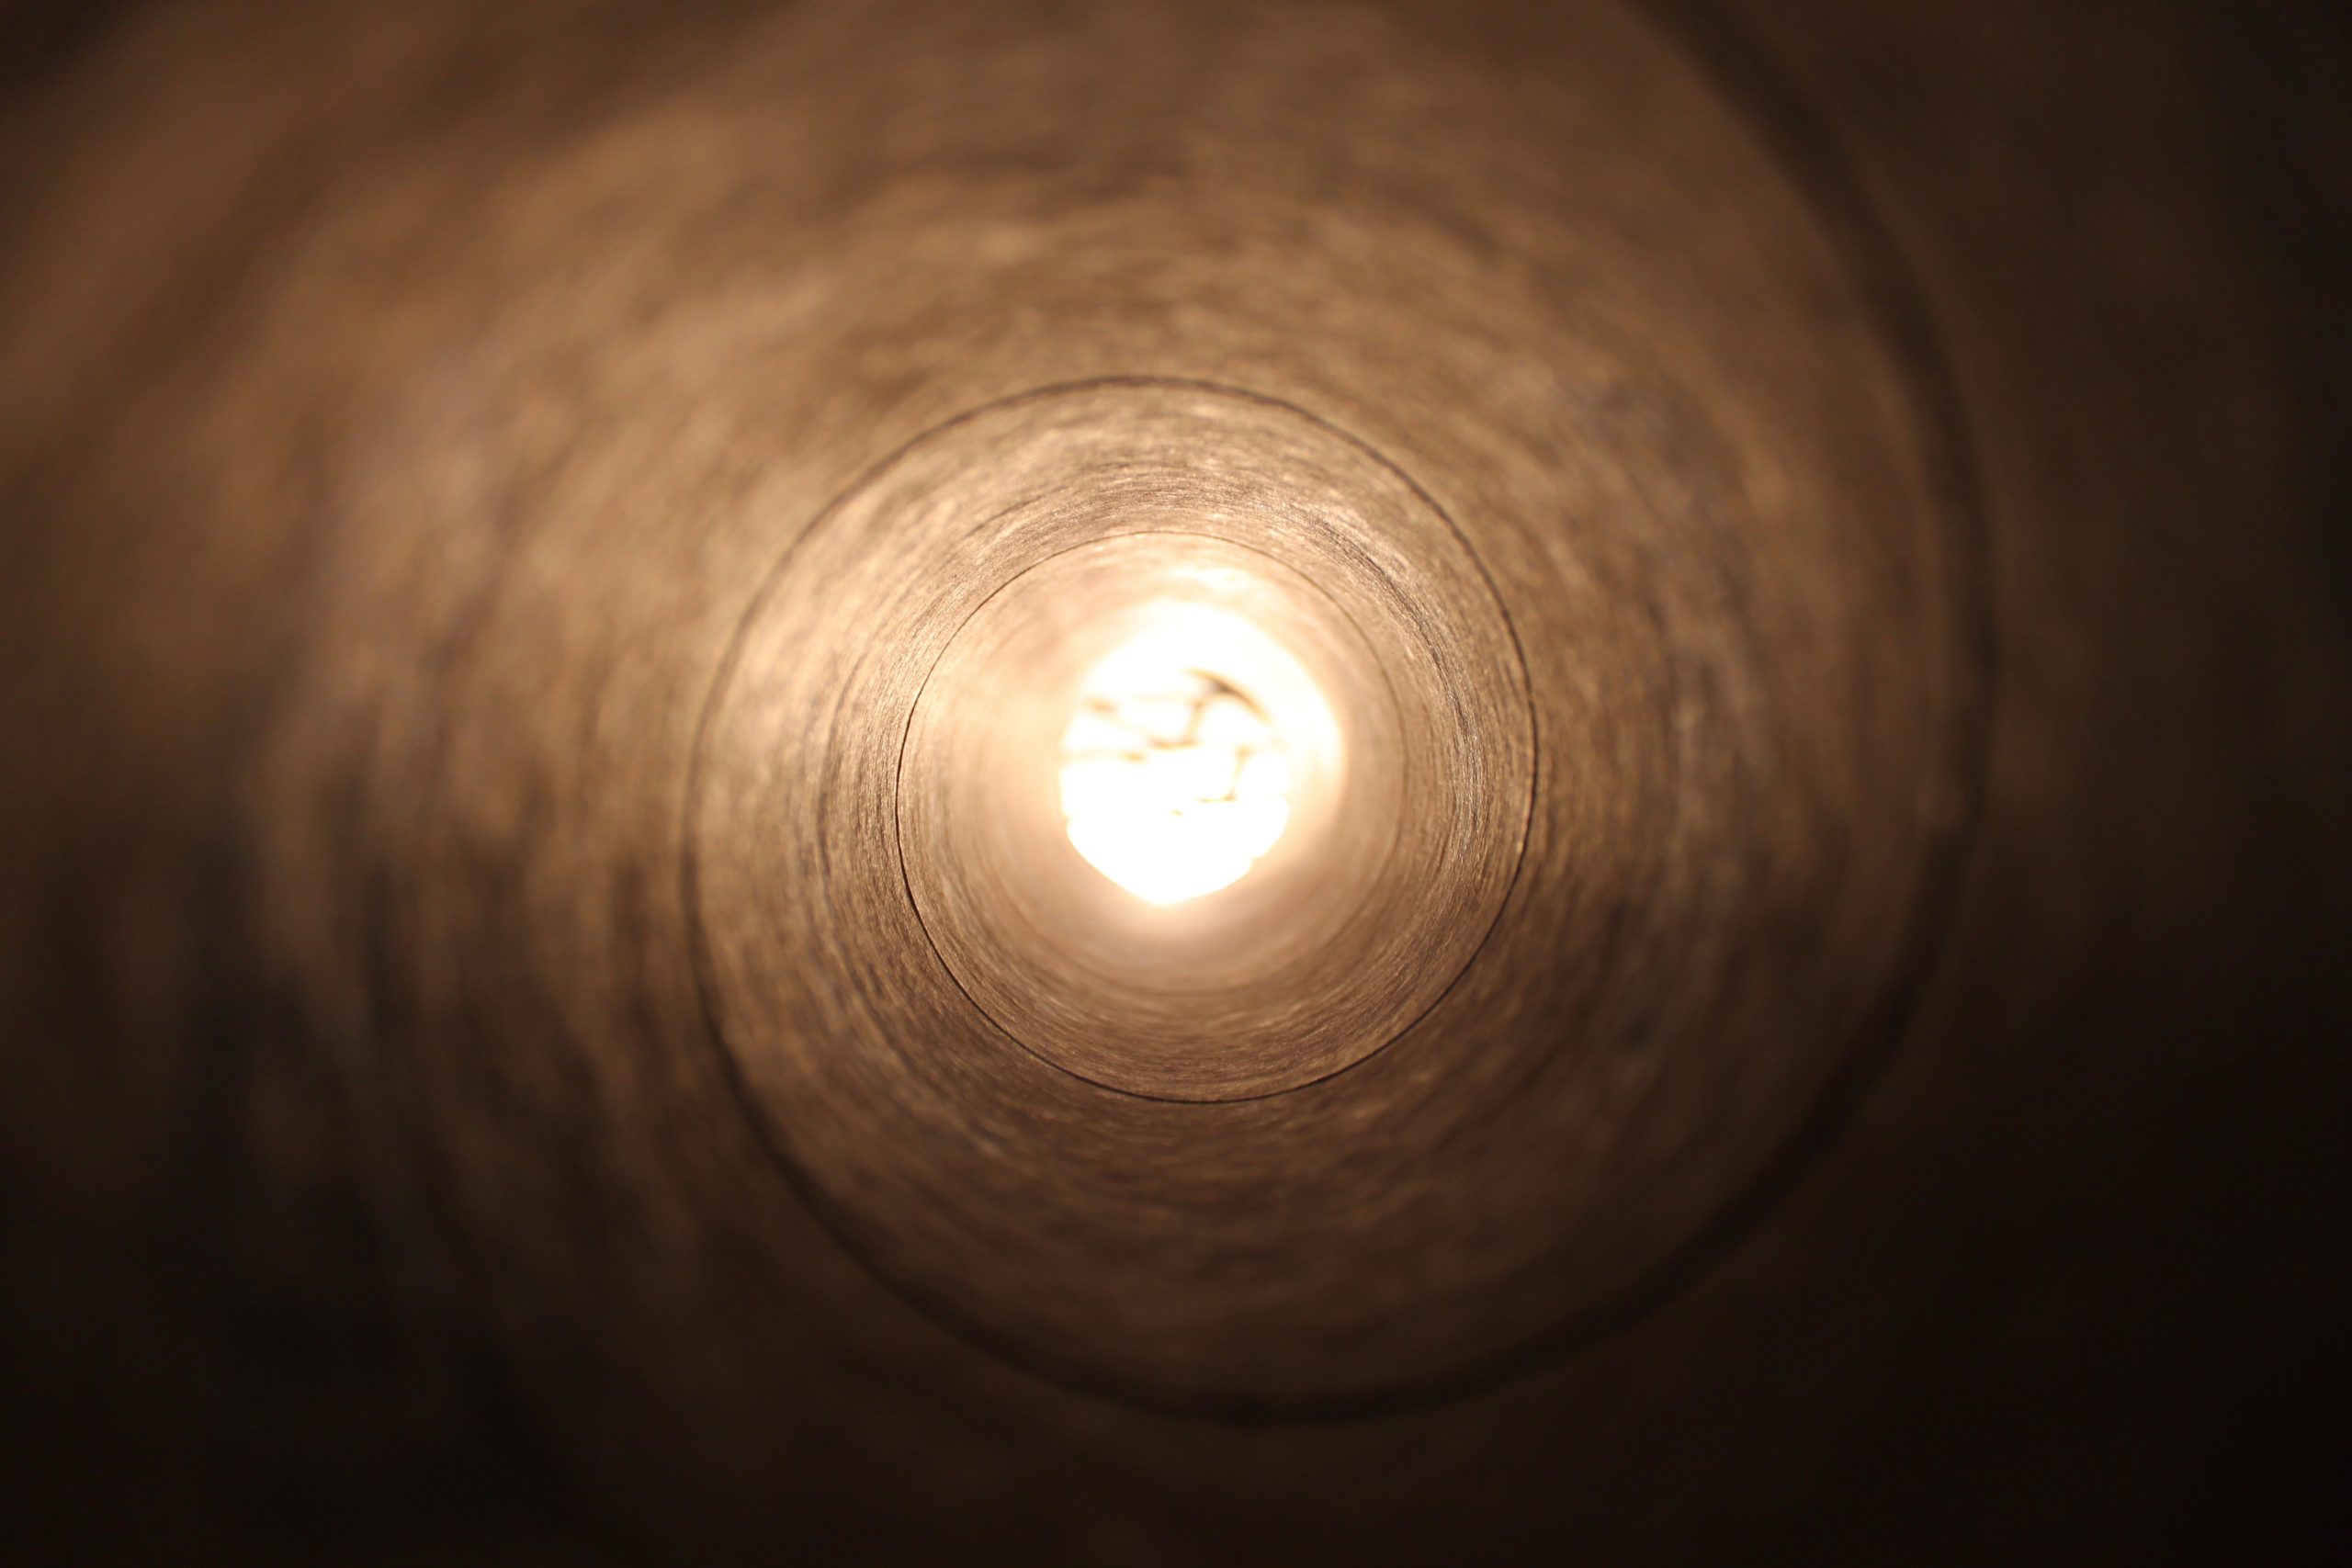 view from inside a pipe